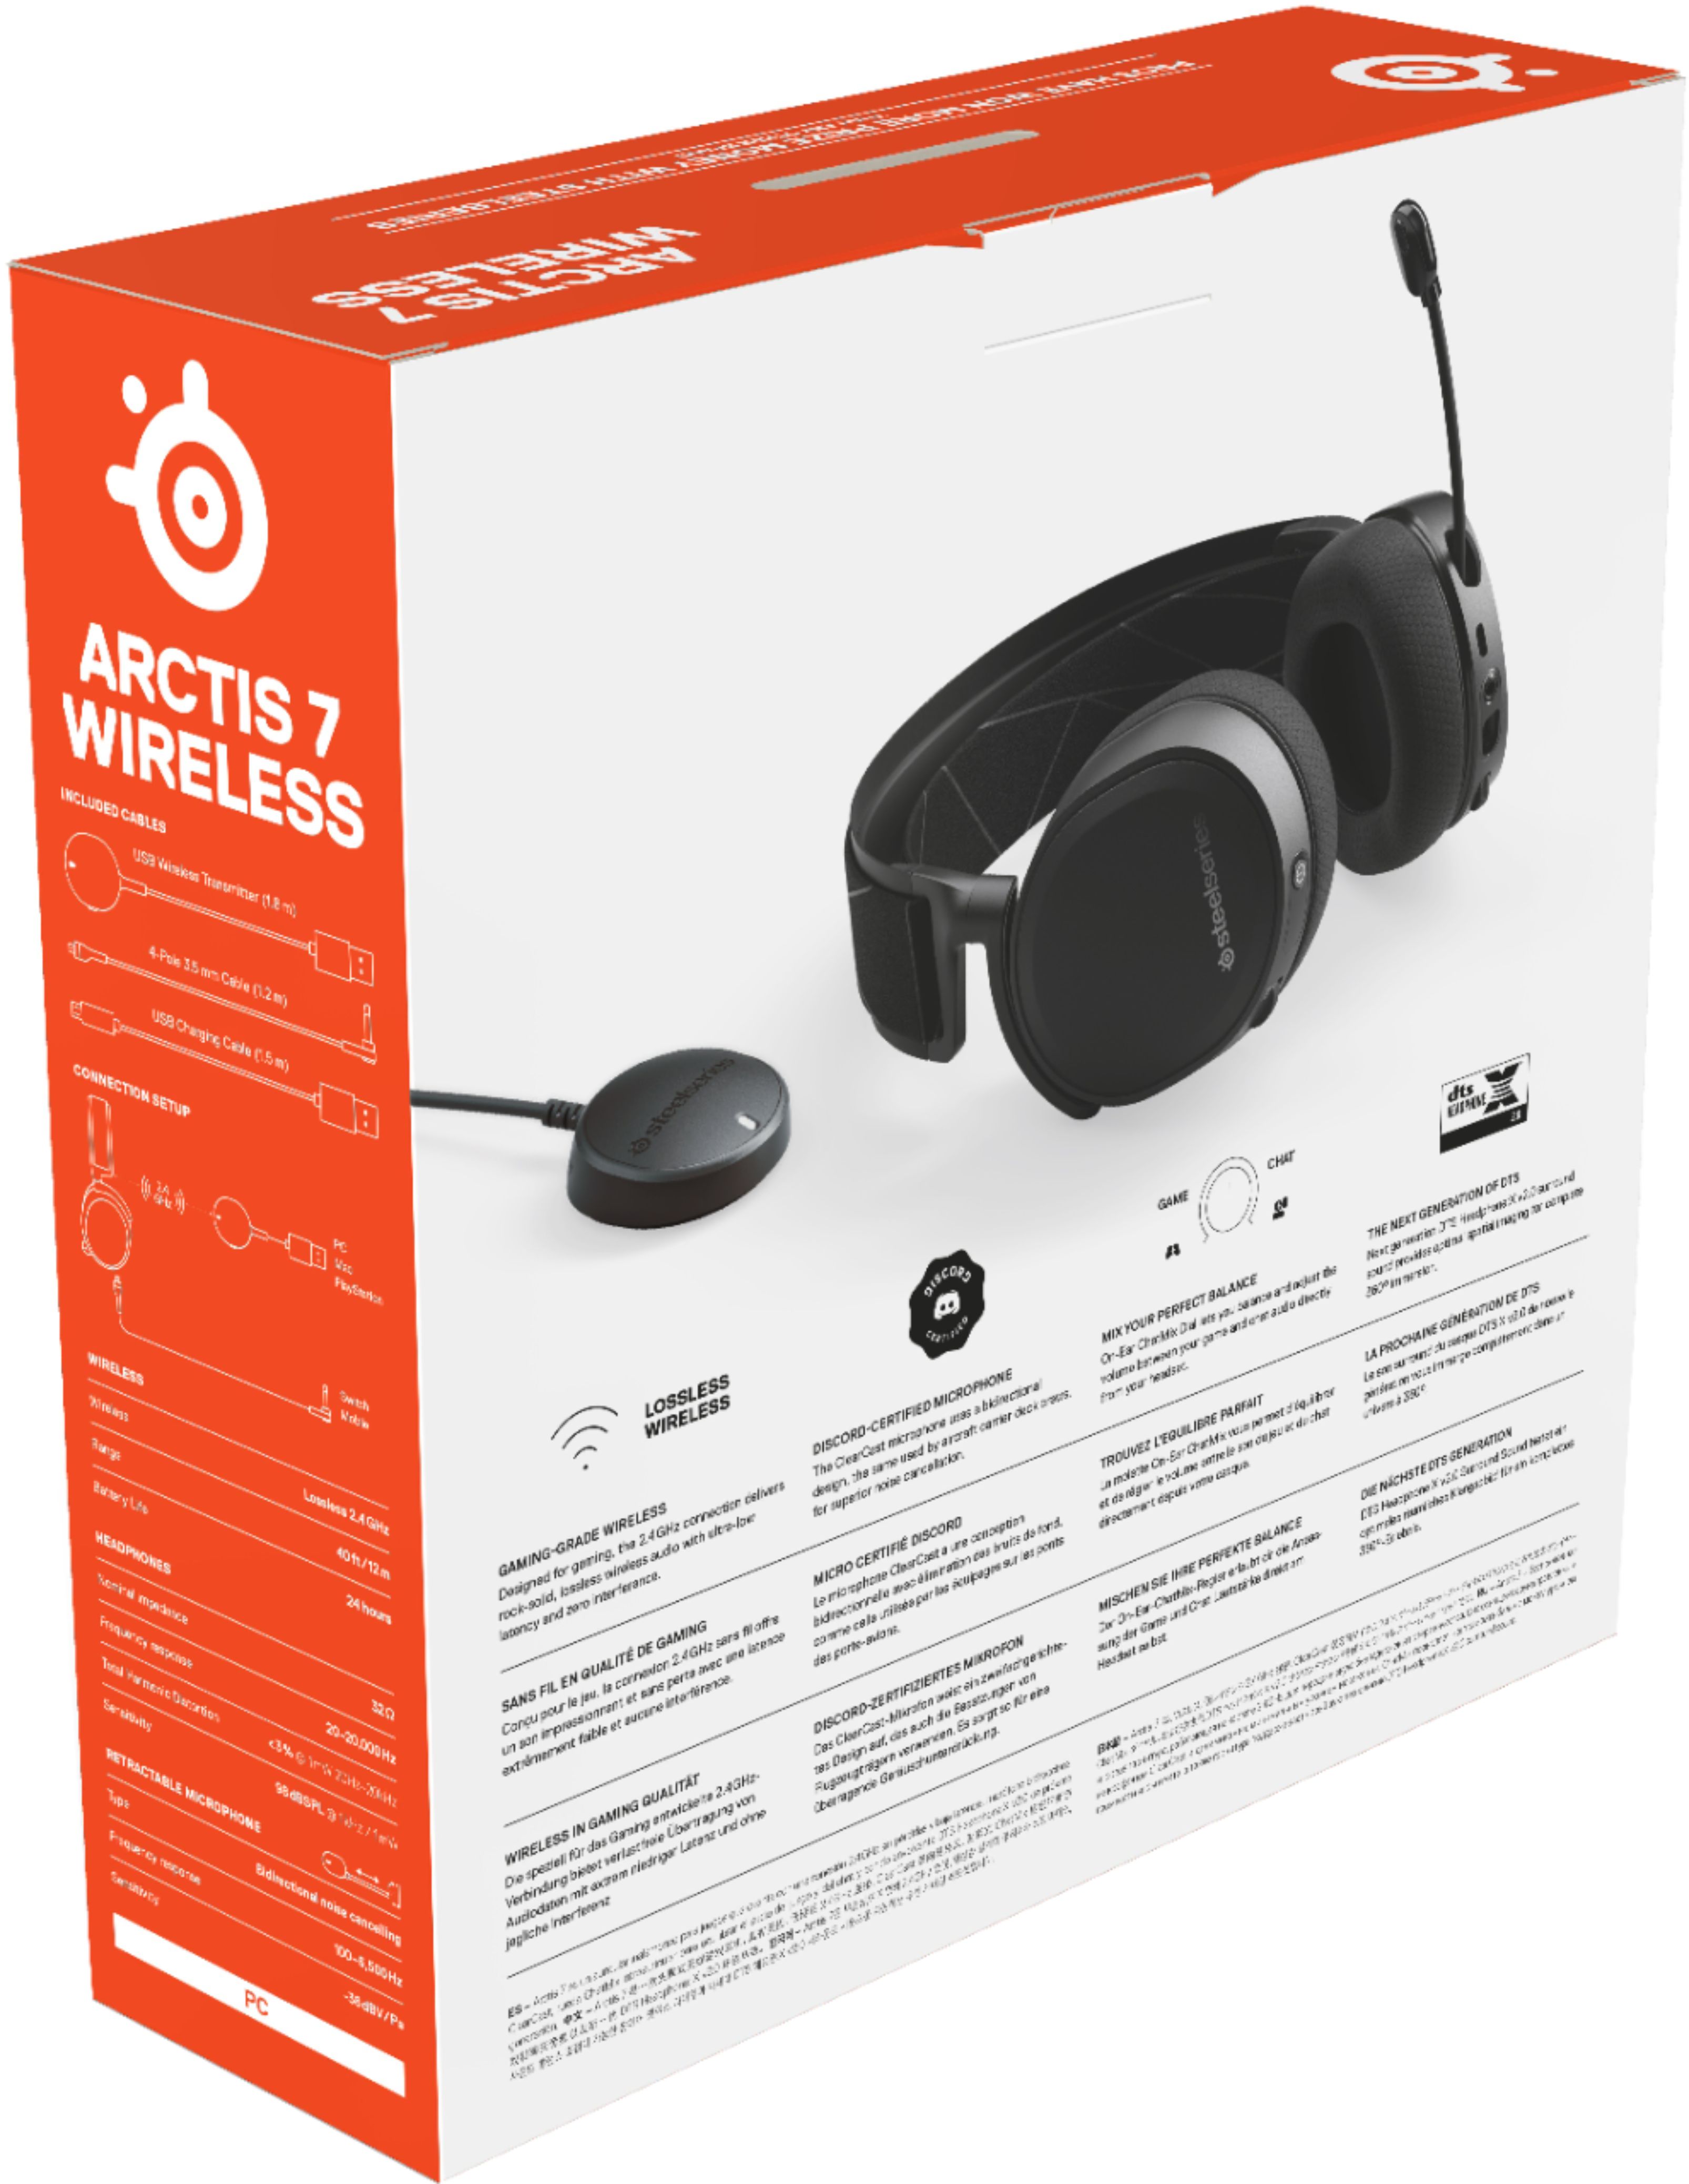 User manual Steelseries Arctis 7 (English - 54 pages)